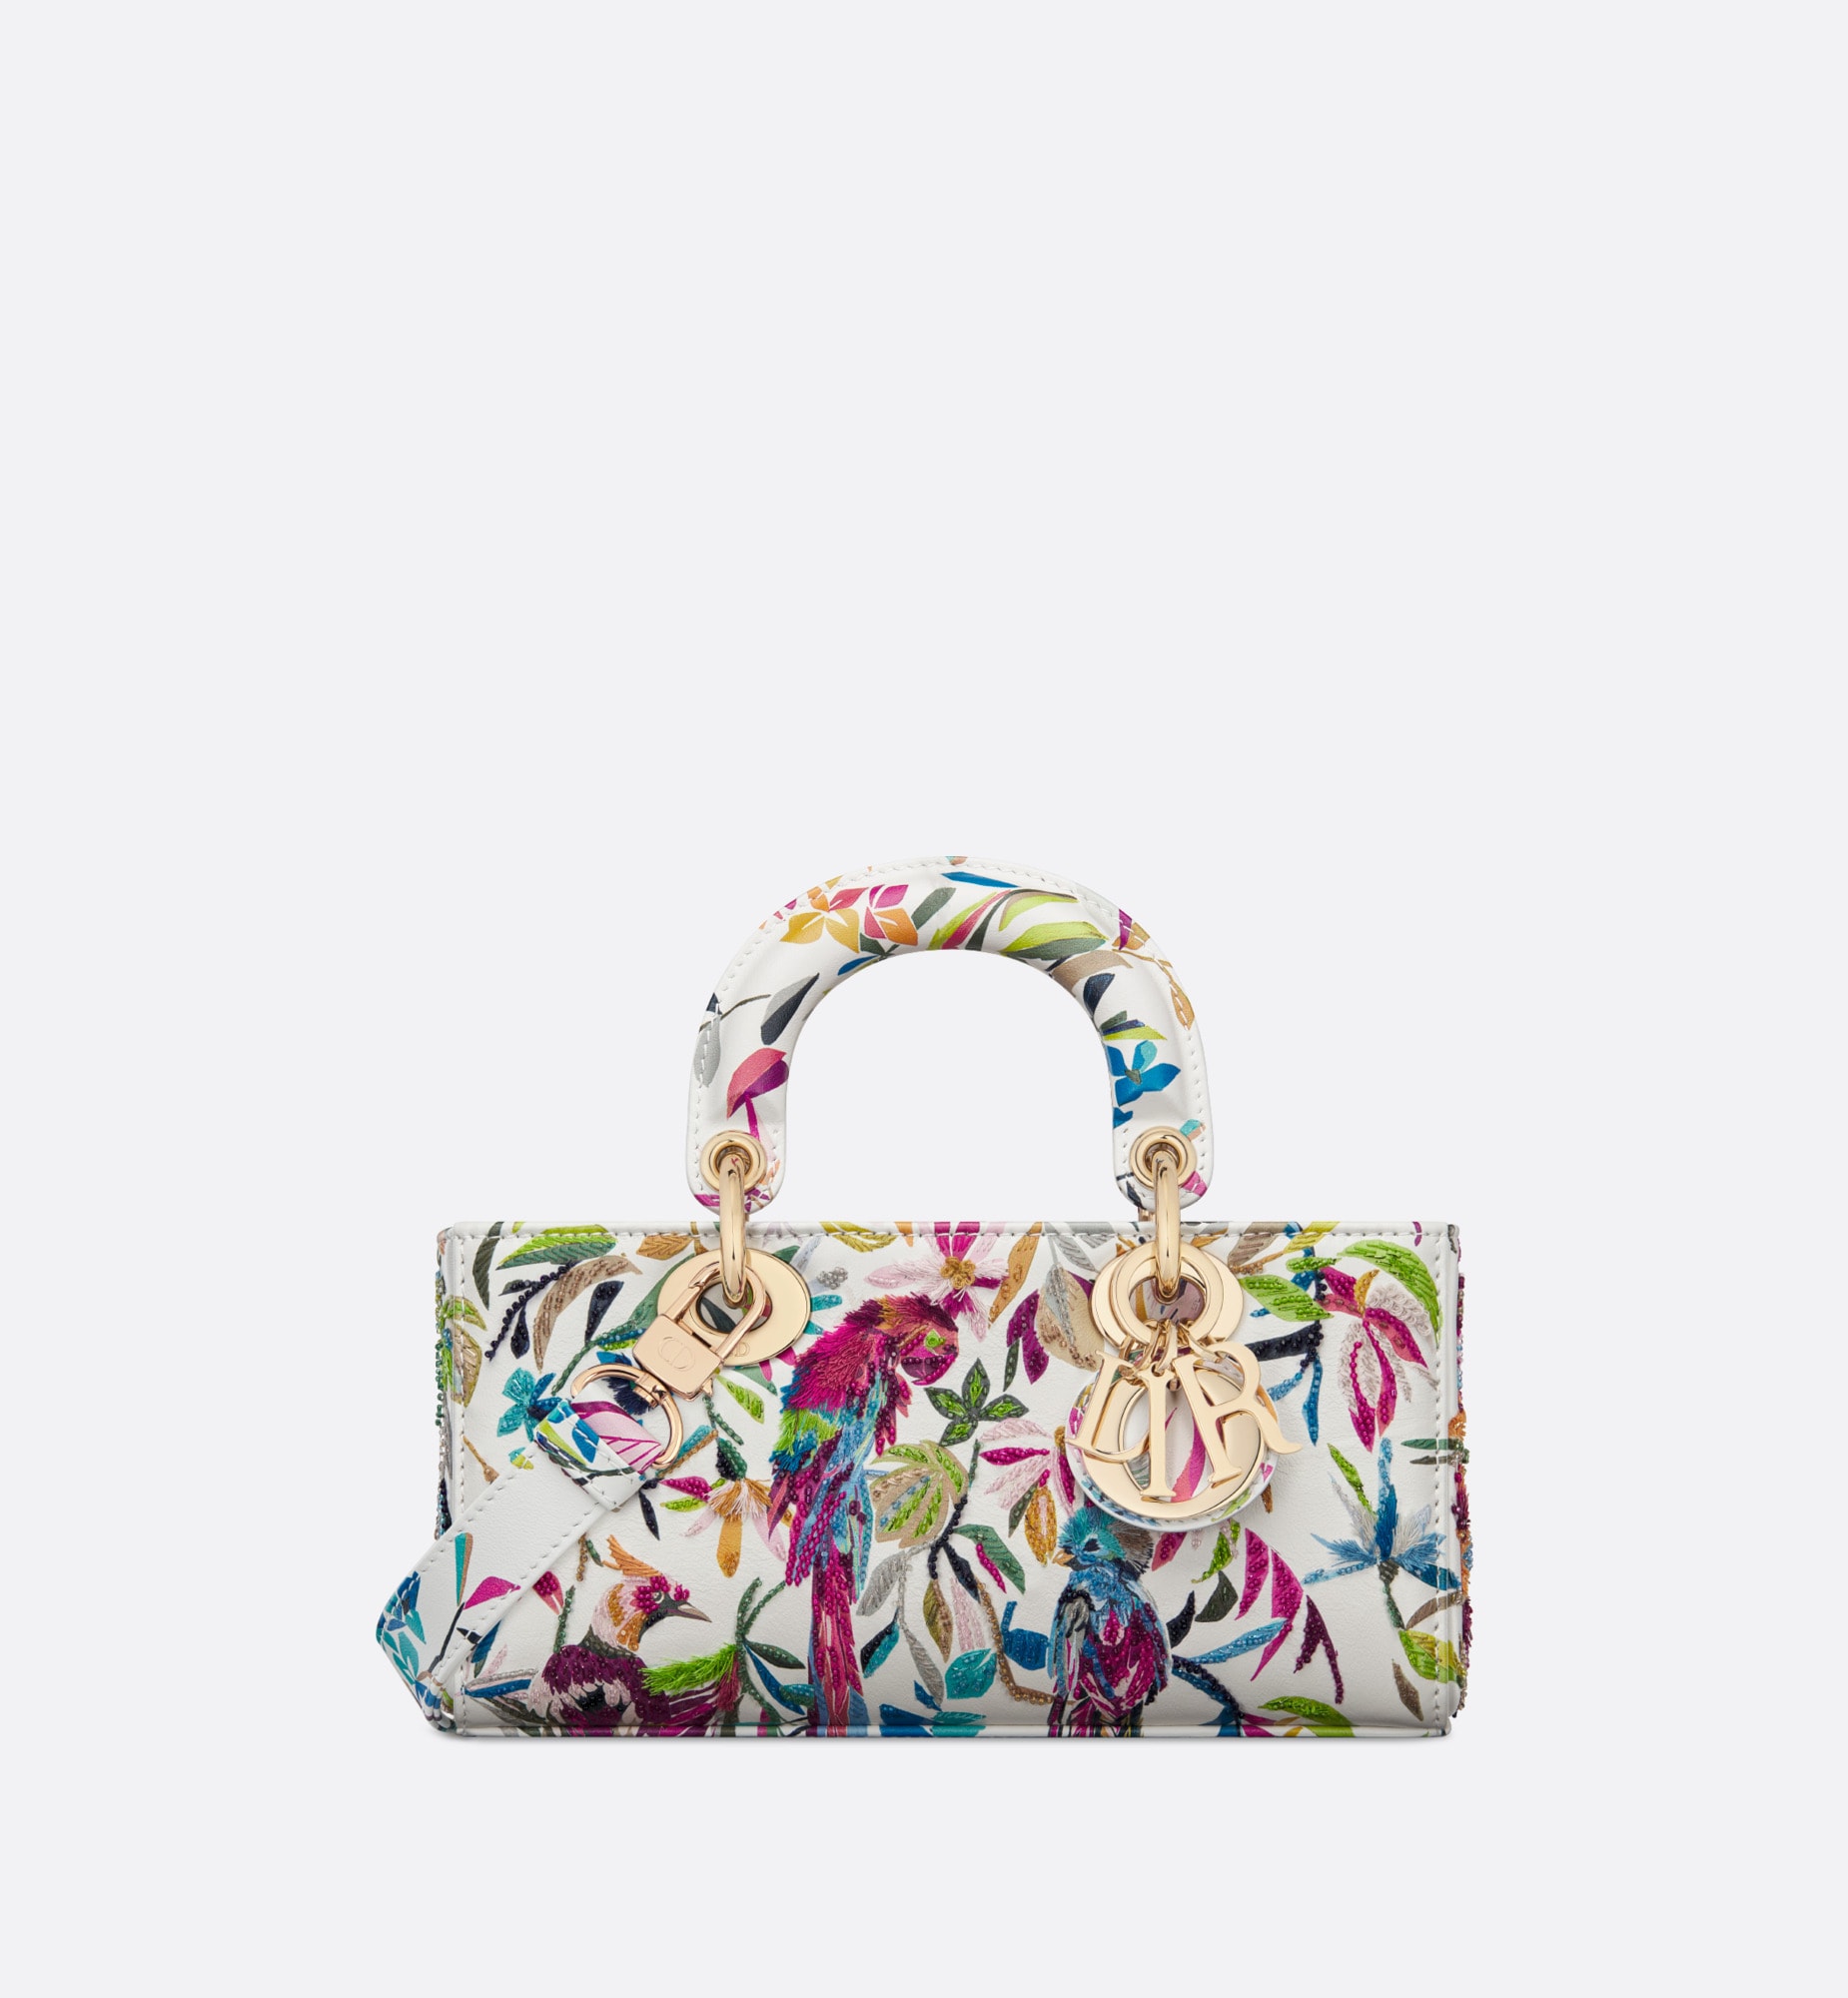 Small Lady D-Joy Bag White Multicolor Calfskin with Toile de Jouy Fantastica Print and Embroidery small lady dior bag